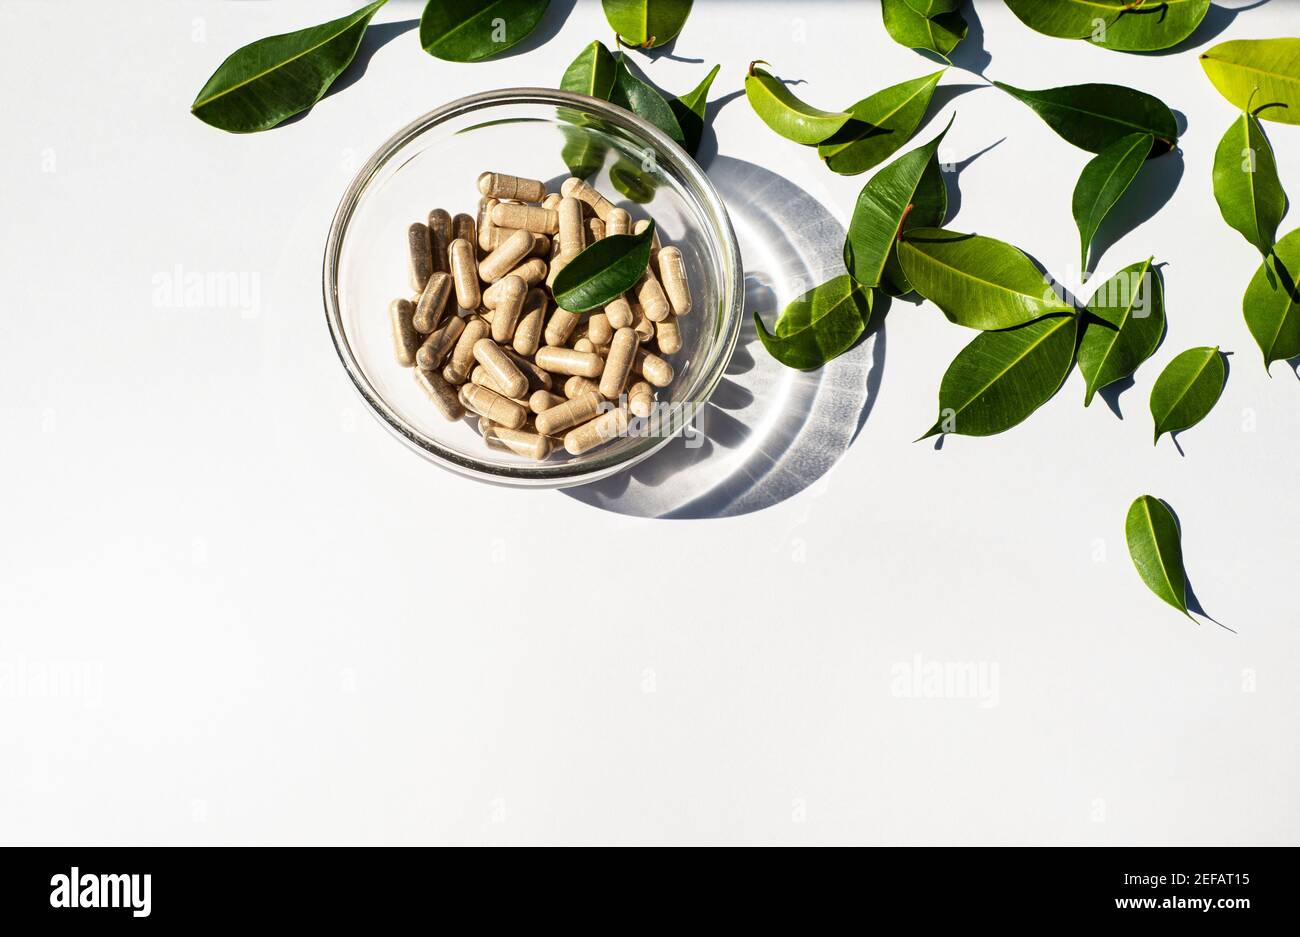 Vitamin capsules in a glass cup. Trace elements and health supplements. Glass shadow and fresh leaves. Copy space for text. White background. Stock Photo